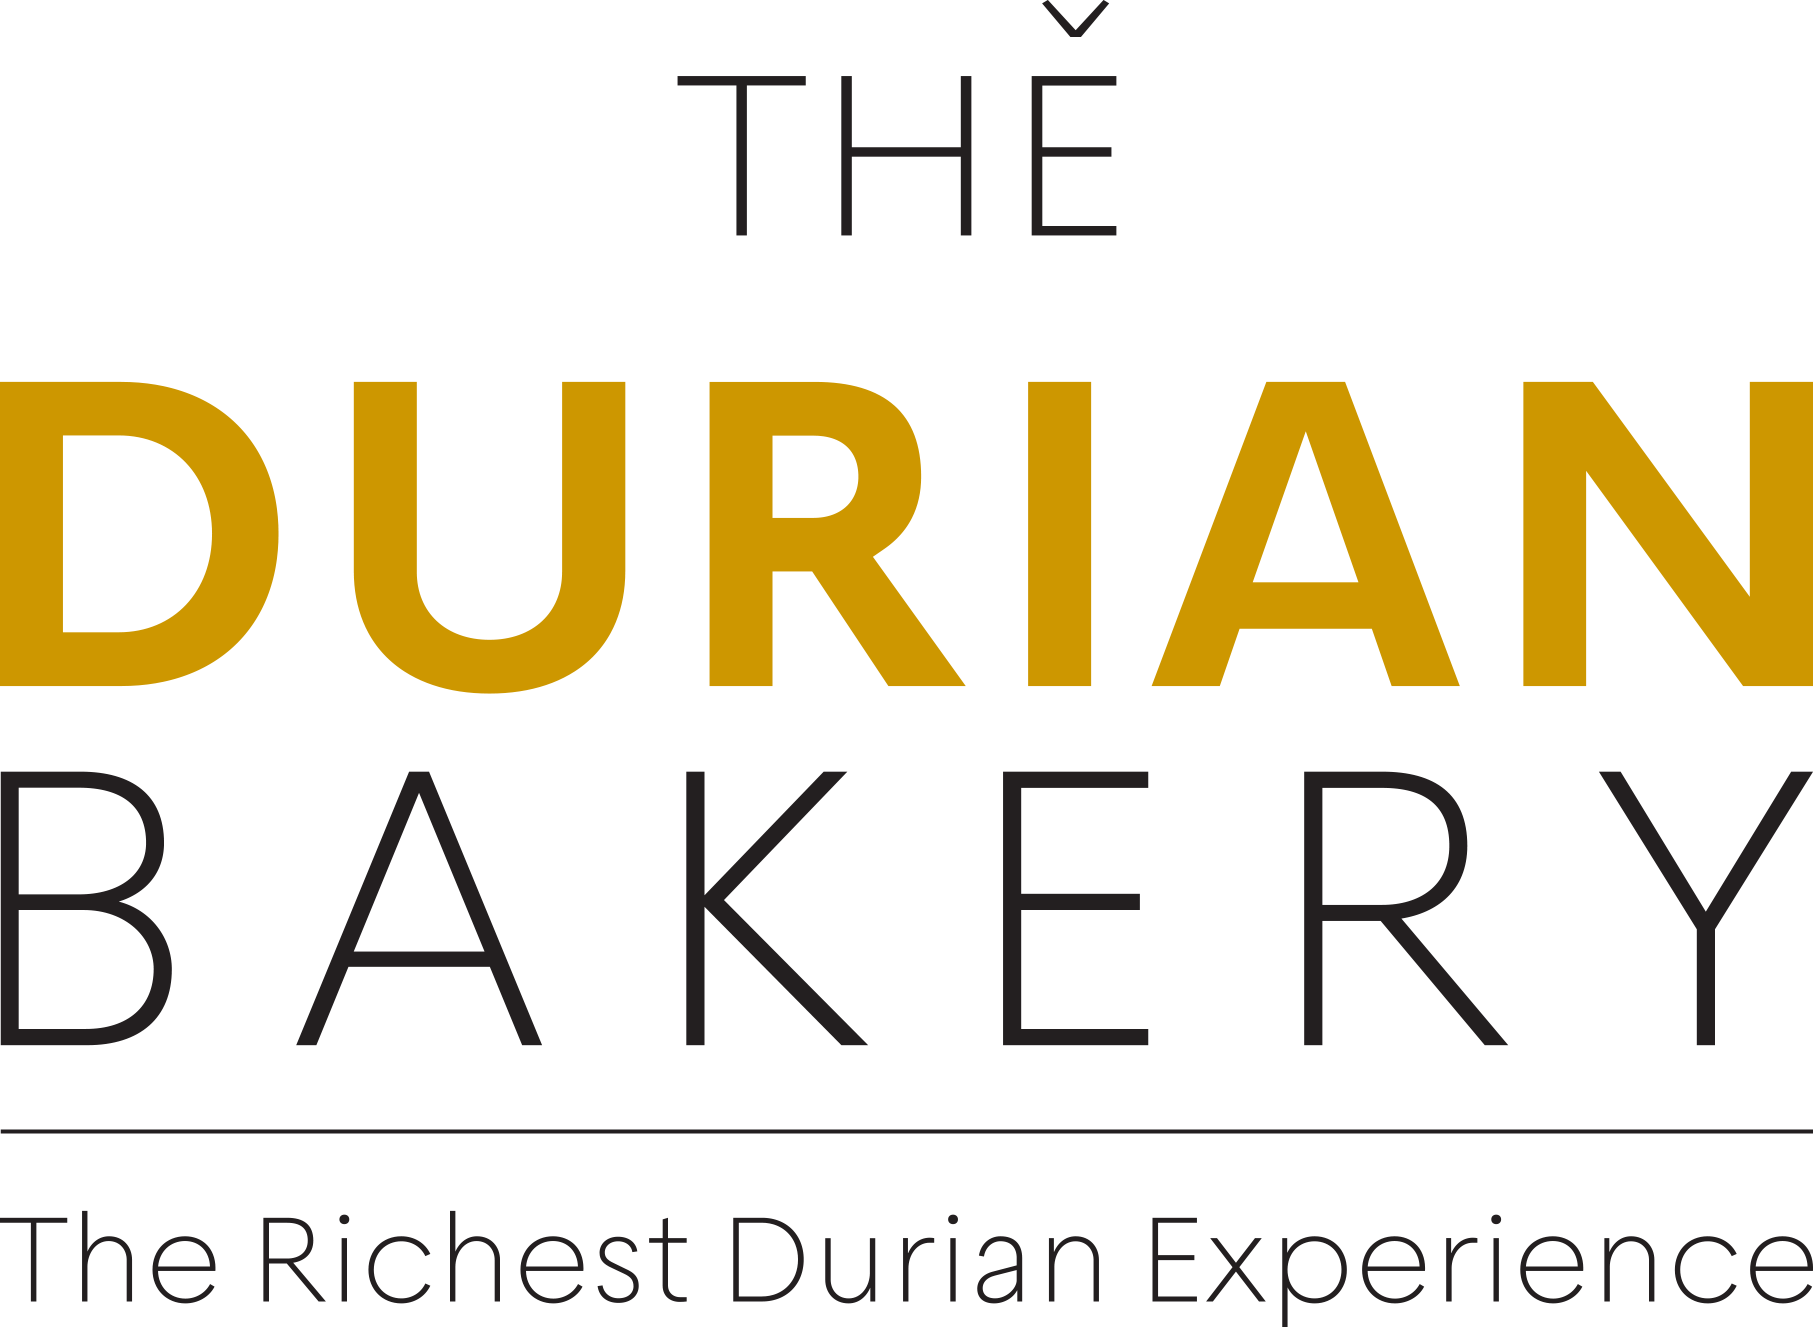 The Durian Bakery